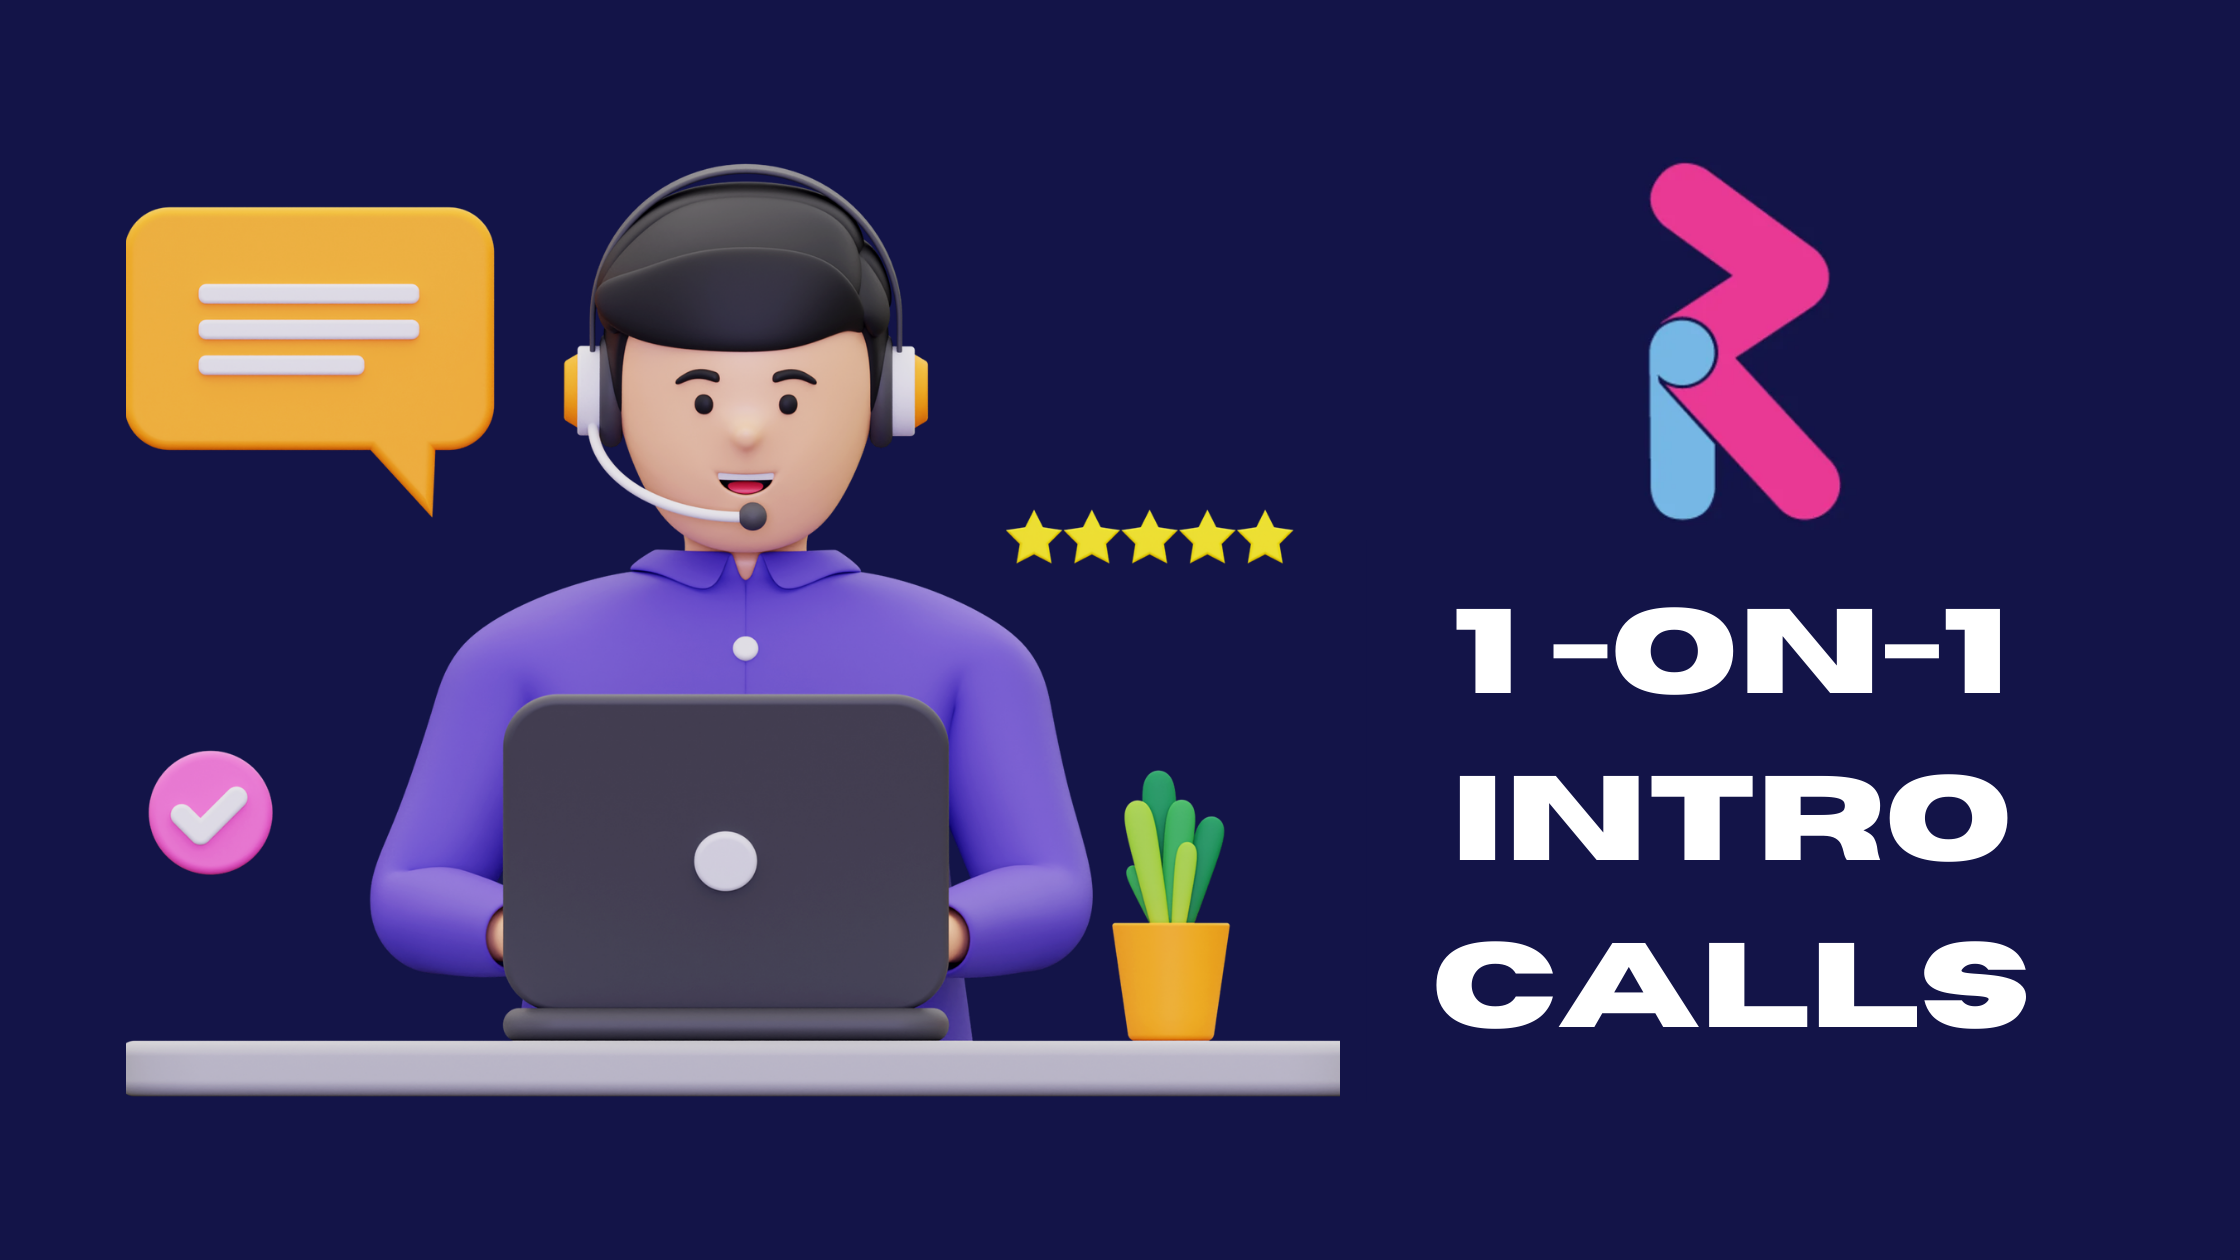 This article image is a picture of a customer service professional working on a laptop. He is wearing a headset with a mic. There’s a speech bubble indicating a conversation with a customer, a small check mark, and 5 golden stars. On the Right side is the RealSAM logo and below that it says, “1-on-1 Intro Calls.”